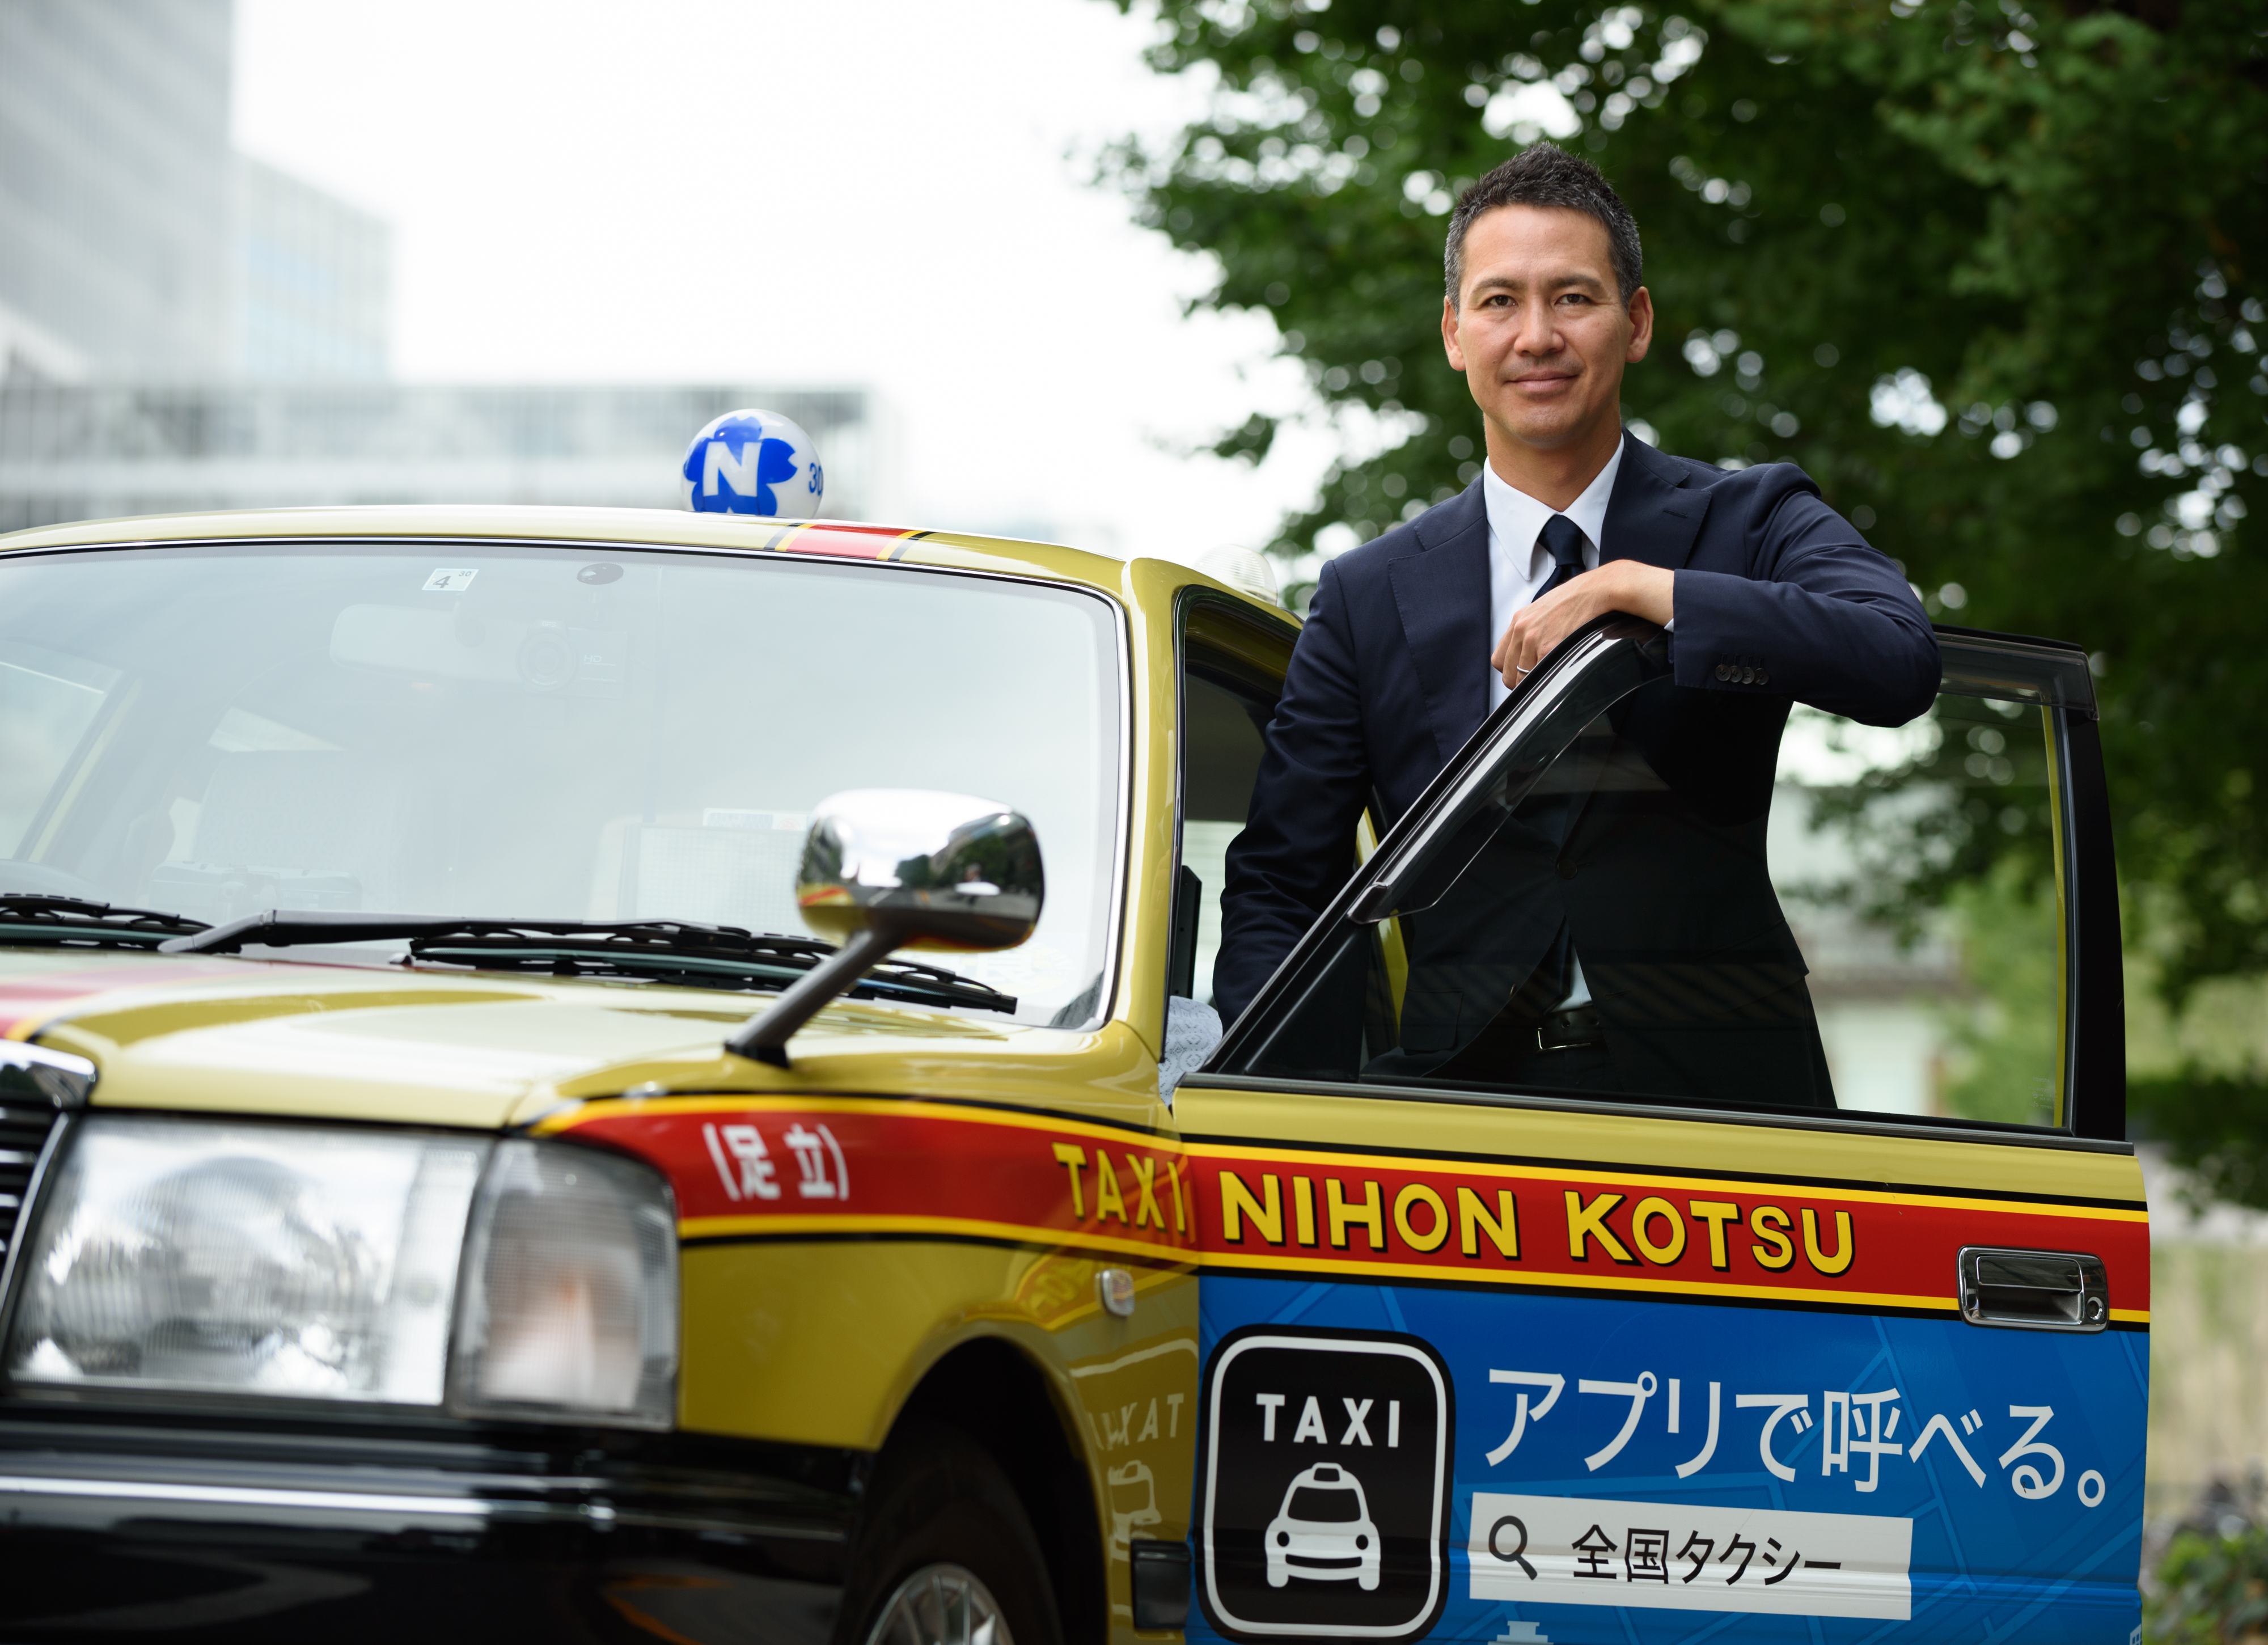 Ichiro Kawanabe, chairman of Nihon Kotsu Co., poses for a photograph in Tokyo on Sept. 15. Kawanabe is aiming to shake up his own ¥1.72 trillion ($15 billion) industry with a taxi-hailing app. He also plans to offer fixed-rate pricing and carpooling. | BLOOMBERG